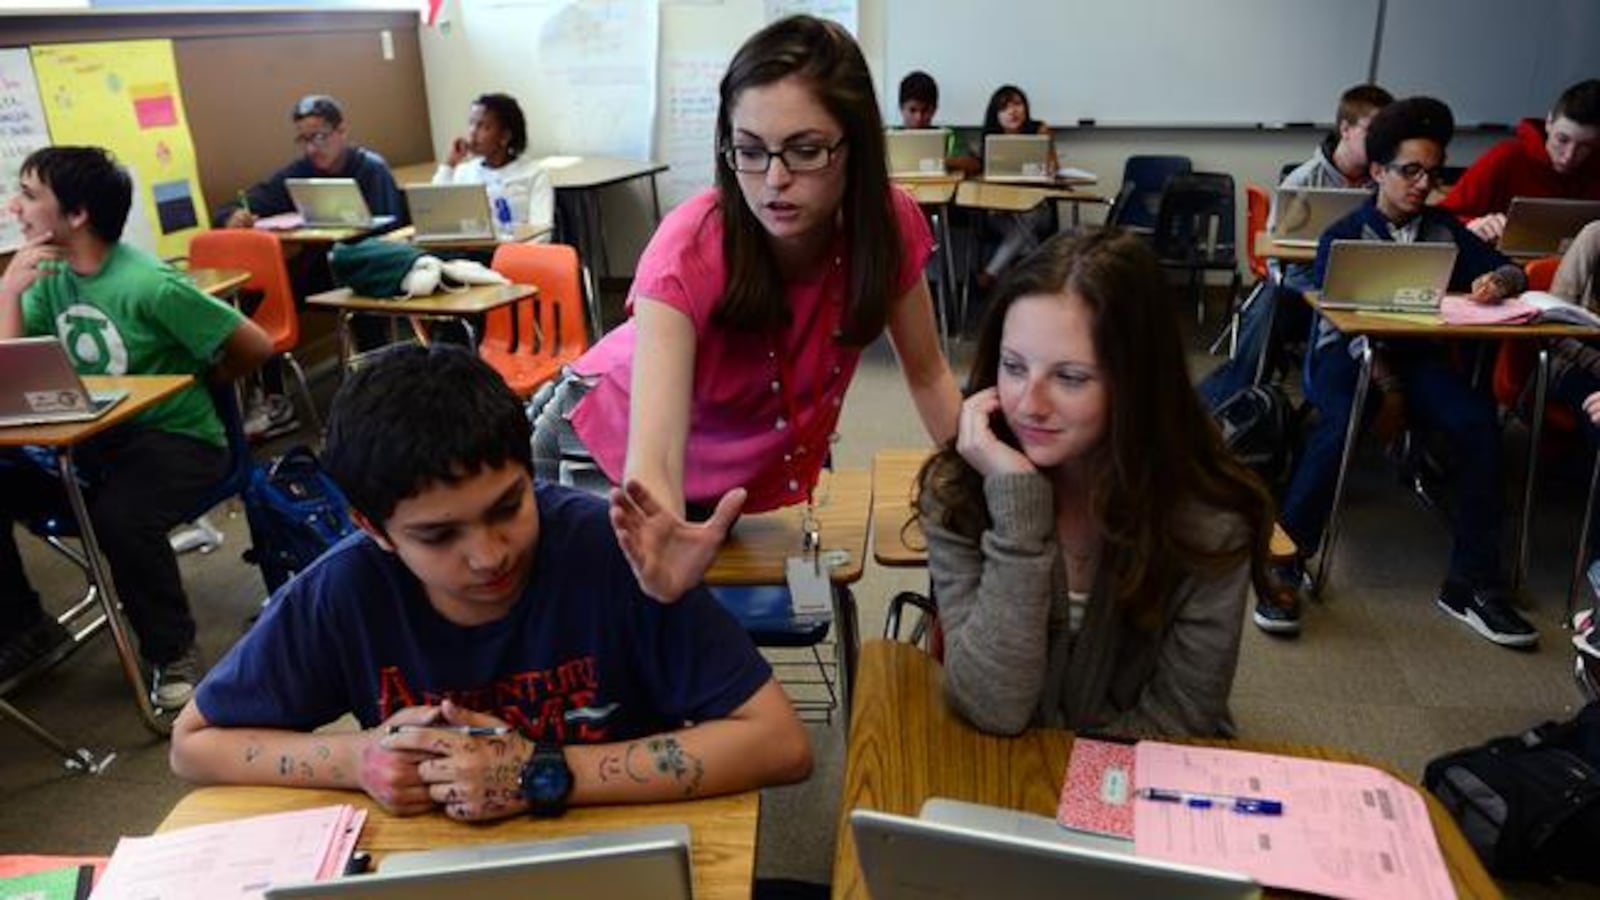 Algebra teacher Jessica Edwards helps students Yosef Abuharus, 14, left, and Emily Botkin, 14, right, with math problems during her 9th grade algebra class  at Smoky Hill High School last  year (Photo by Helen H. Richardson/ The Denver Post).